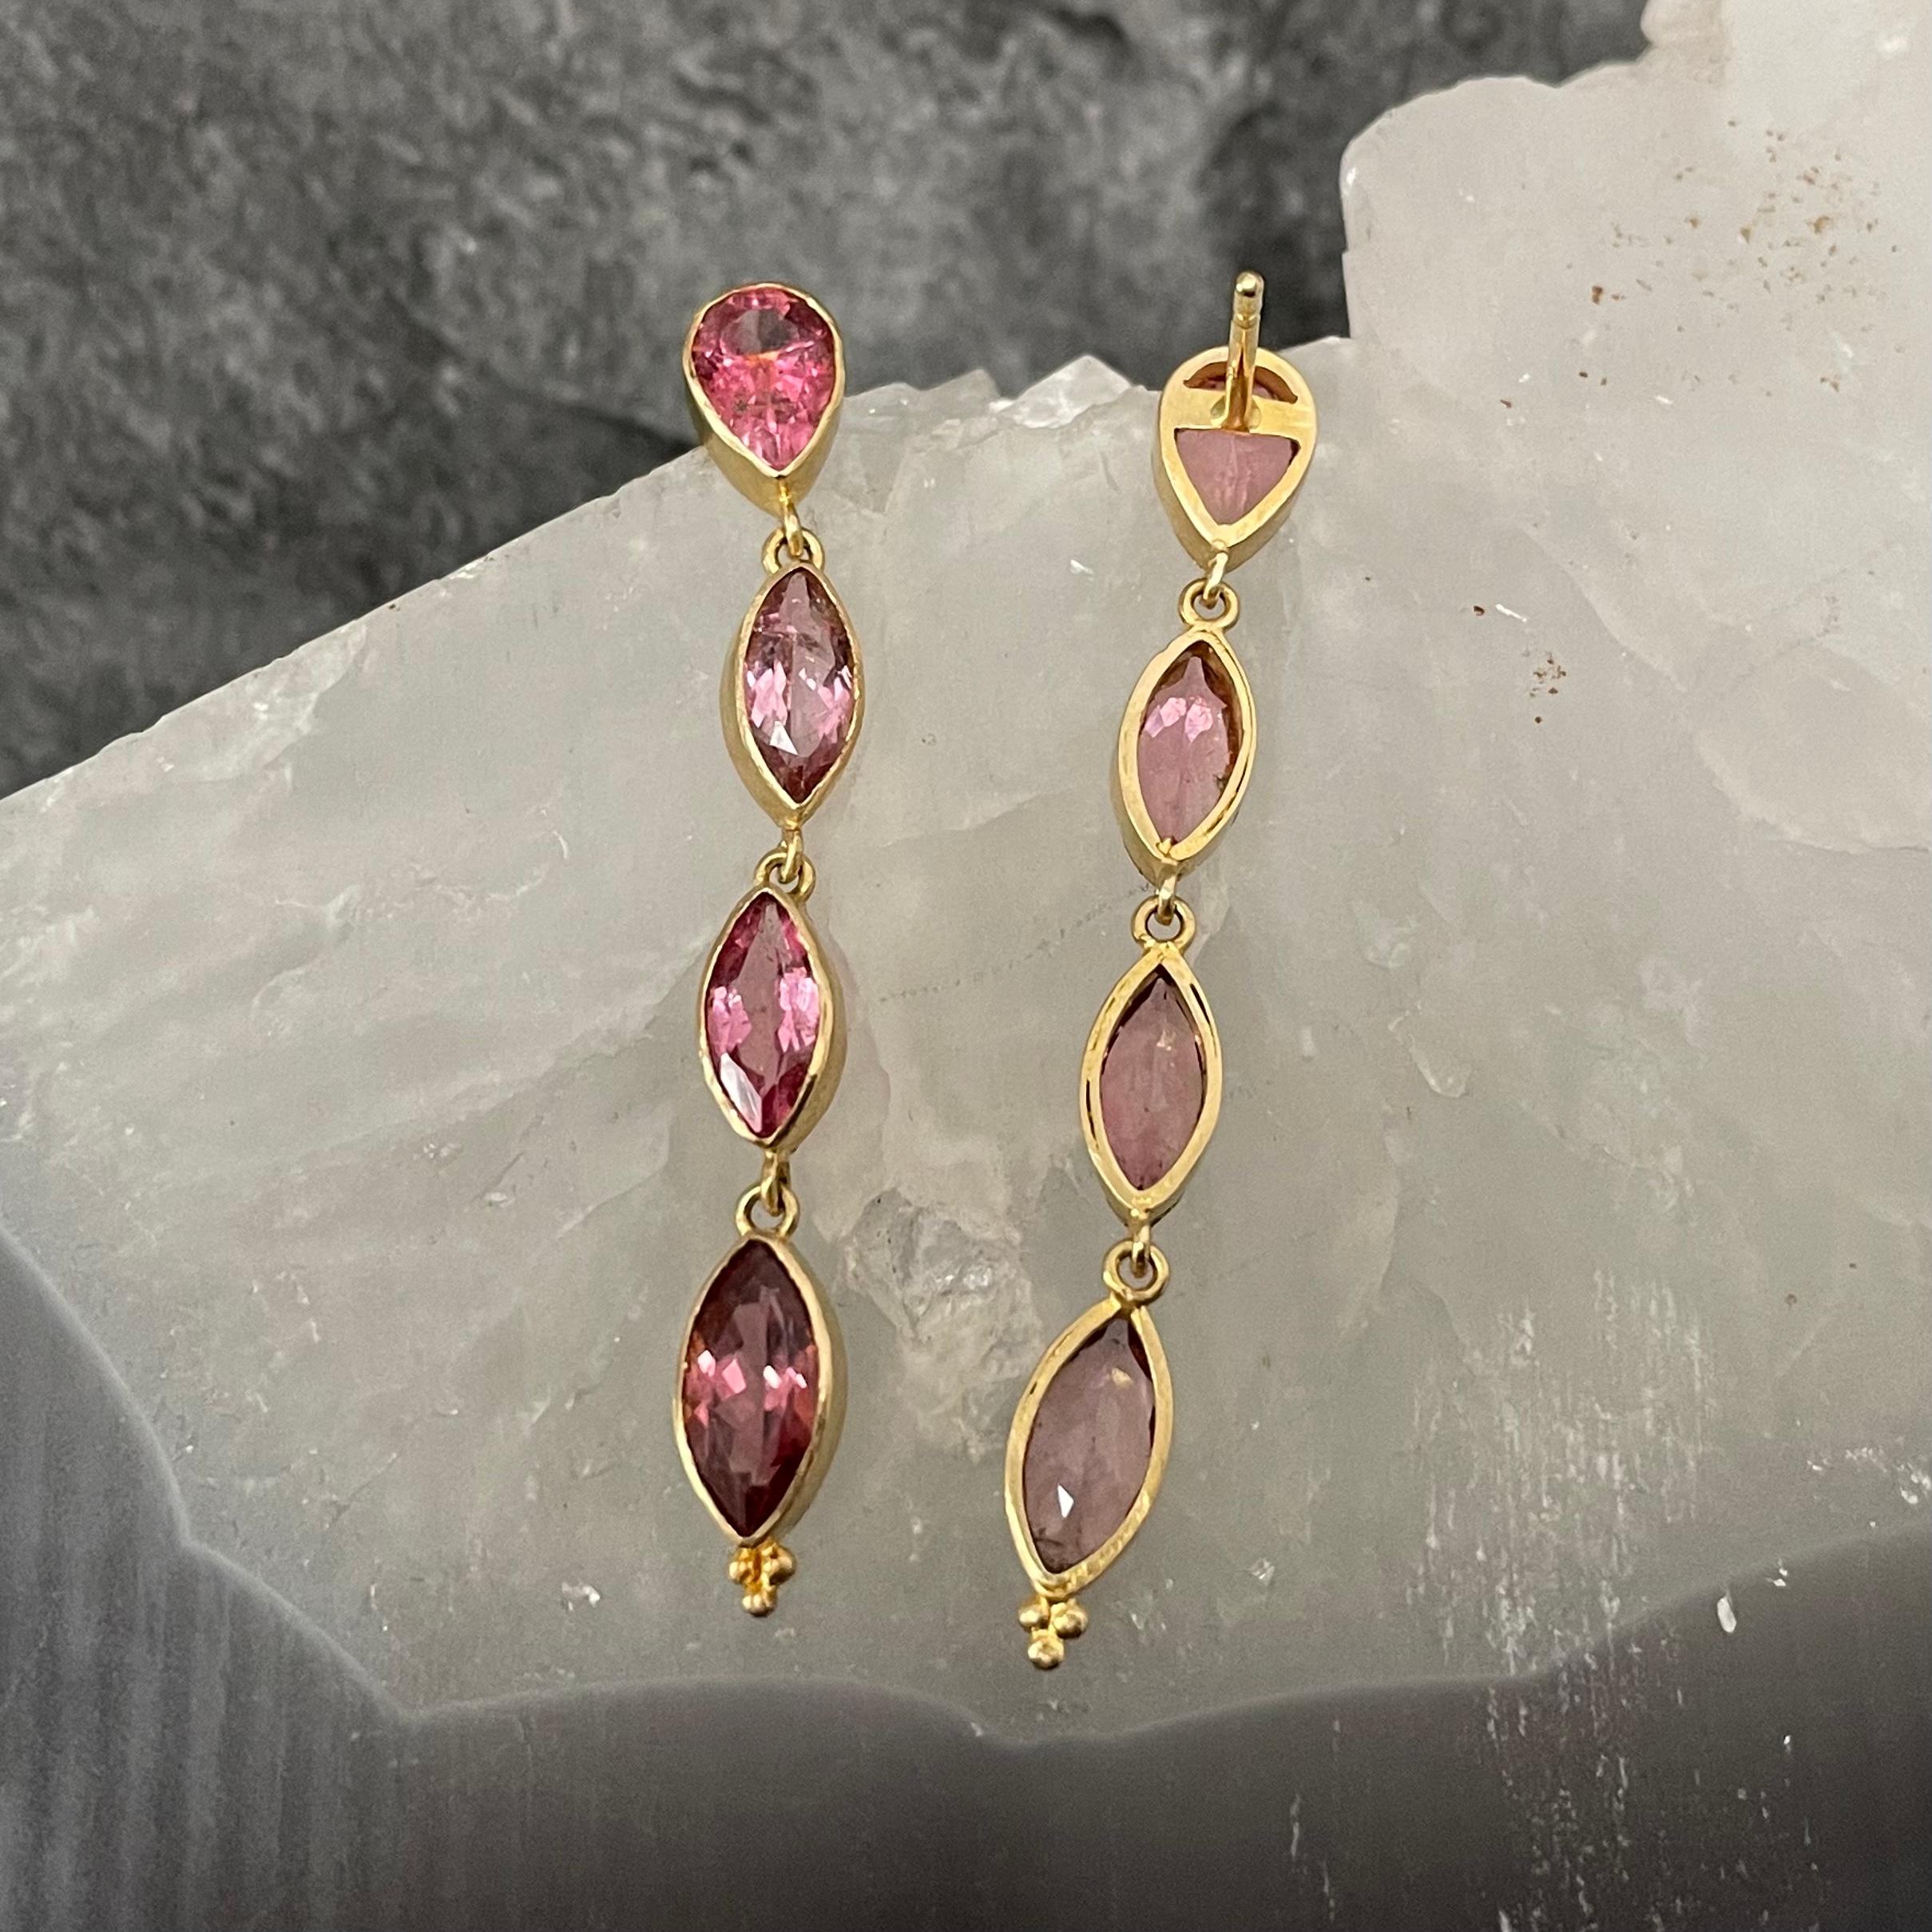 Steven Battelle 4.9 Carats Pink Tourmaline 18K Gold Post Earrings In New Condition For Sale In Soquel, CA